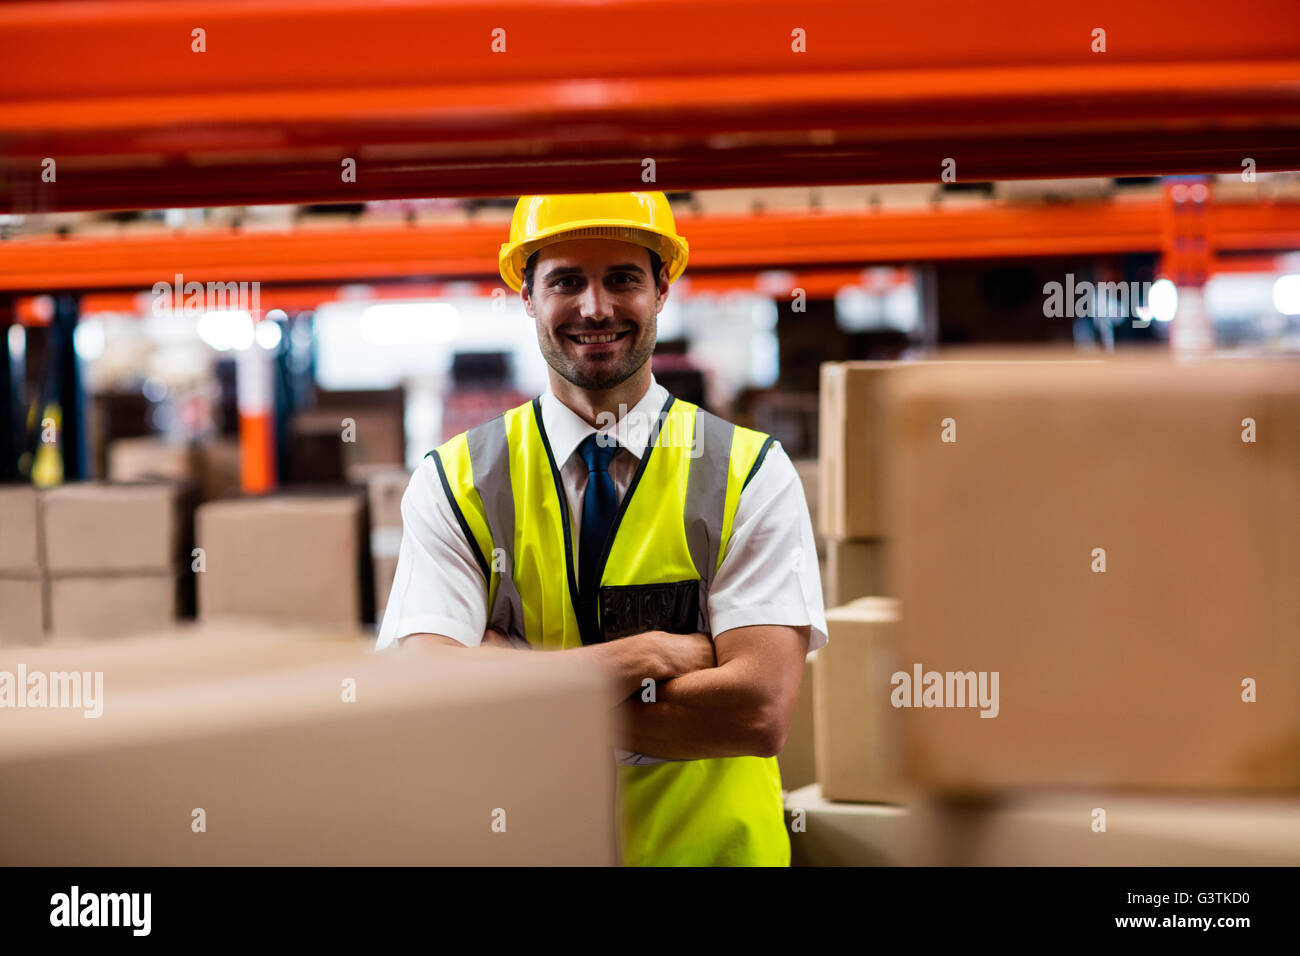 Warehouse manager standing with helmet Stock Photo